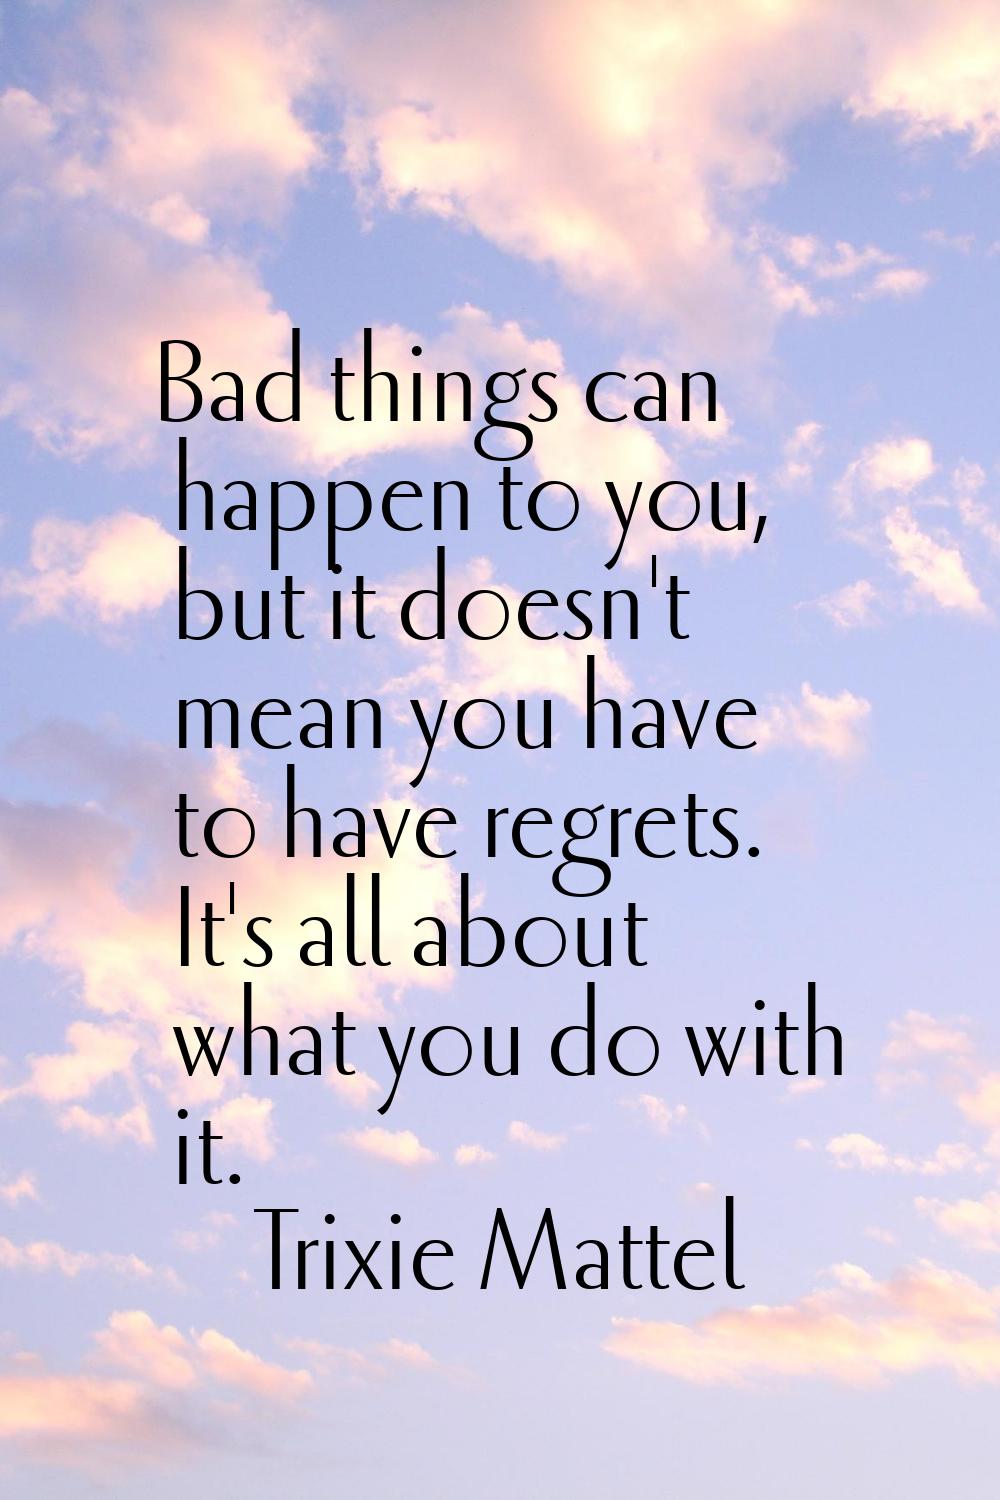 Bad things can happen to you, but it doesn't mean you have to have regrets. It's all about what you